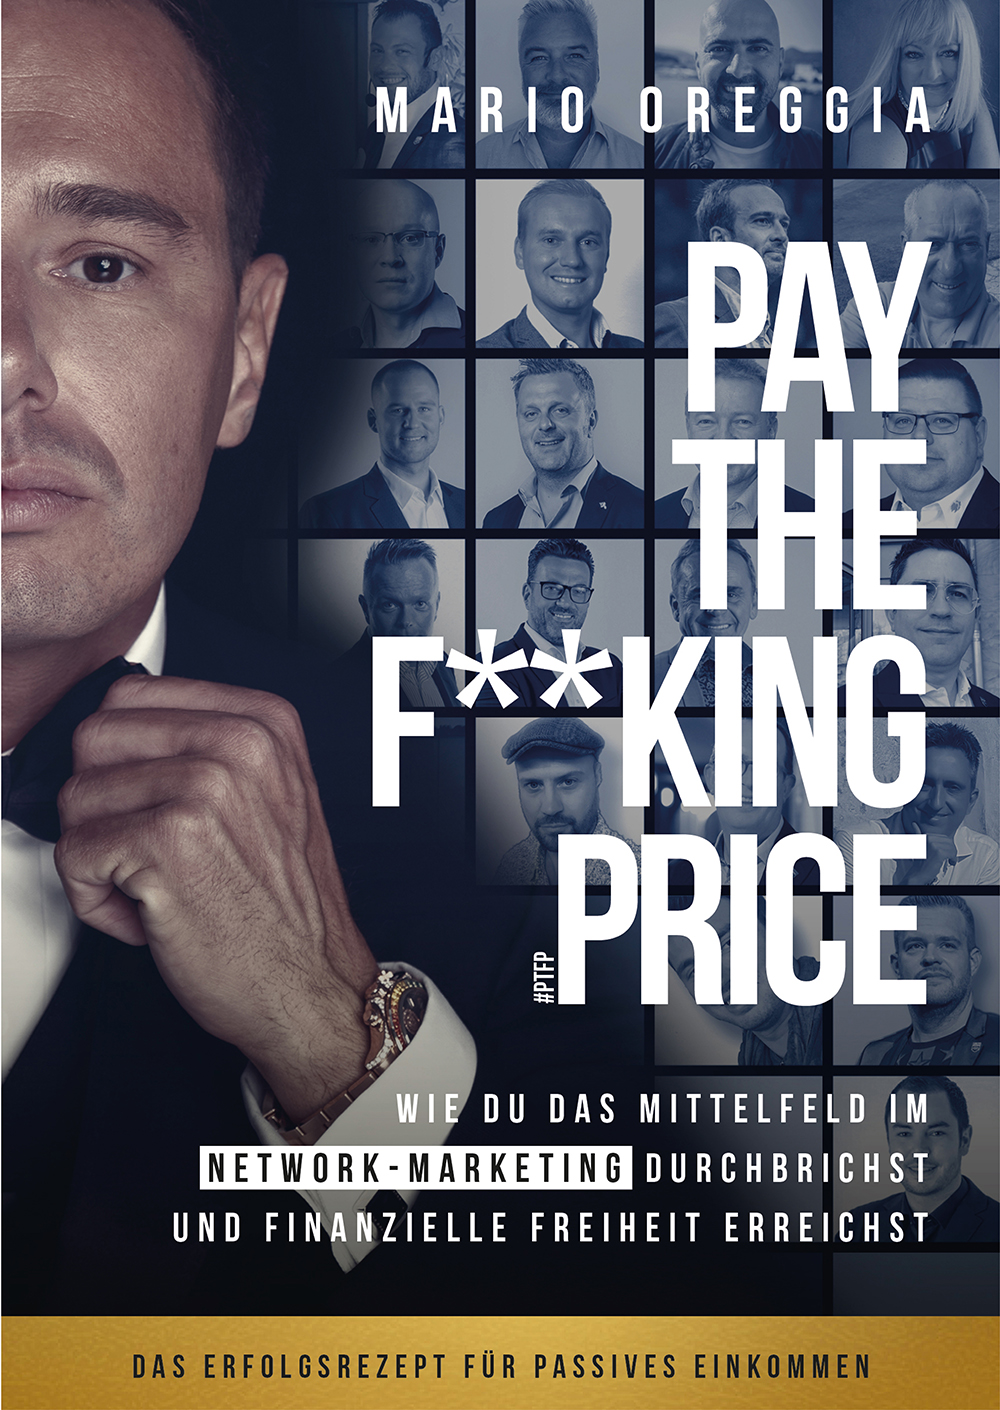 PAY THE F**CKING PRICE by Mario Oreggia – Hörbuch